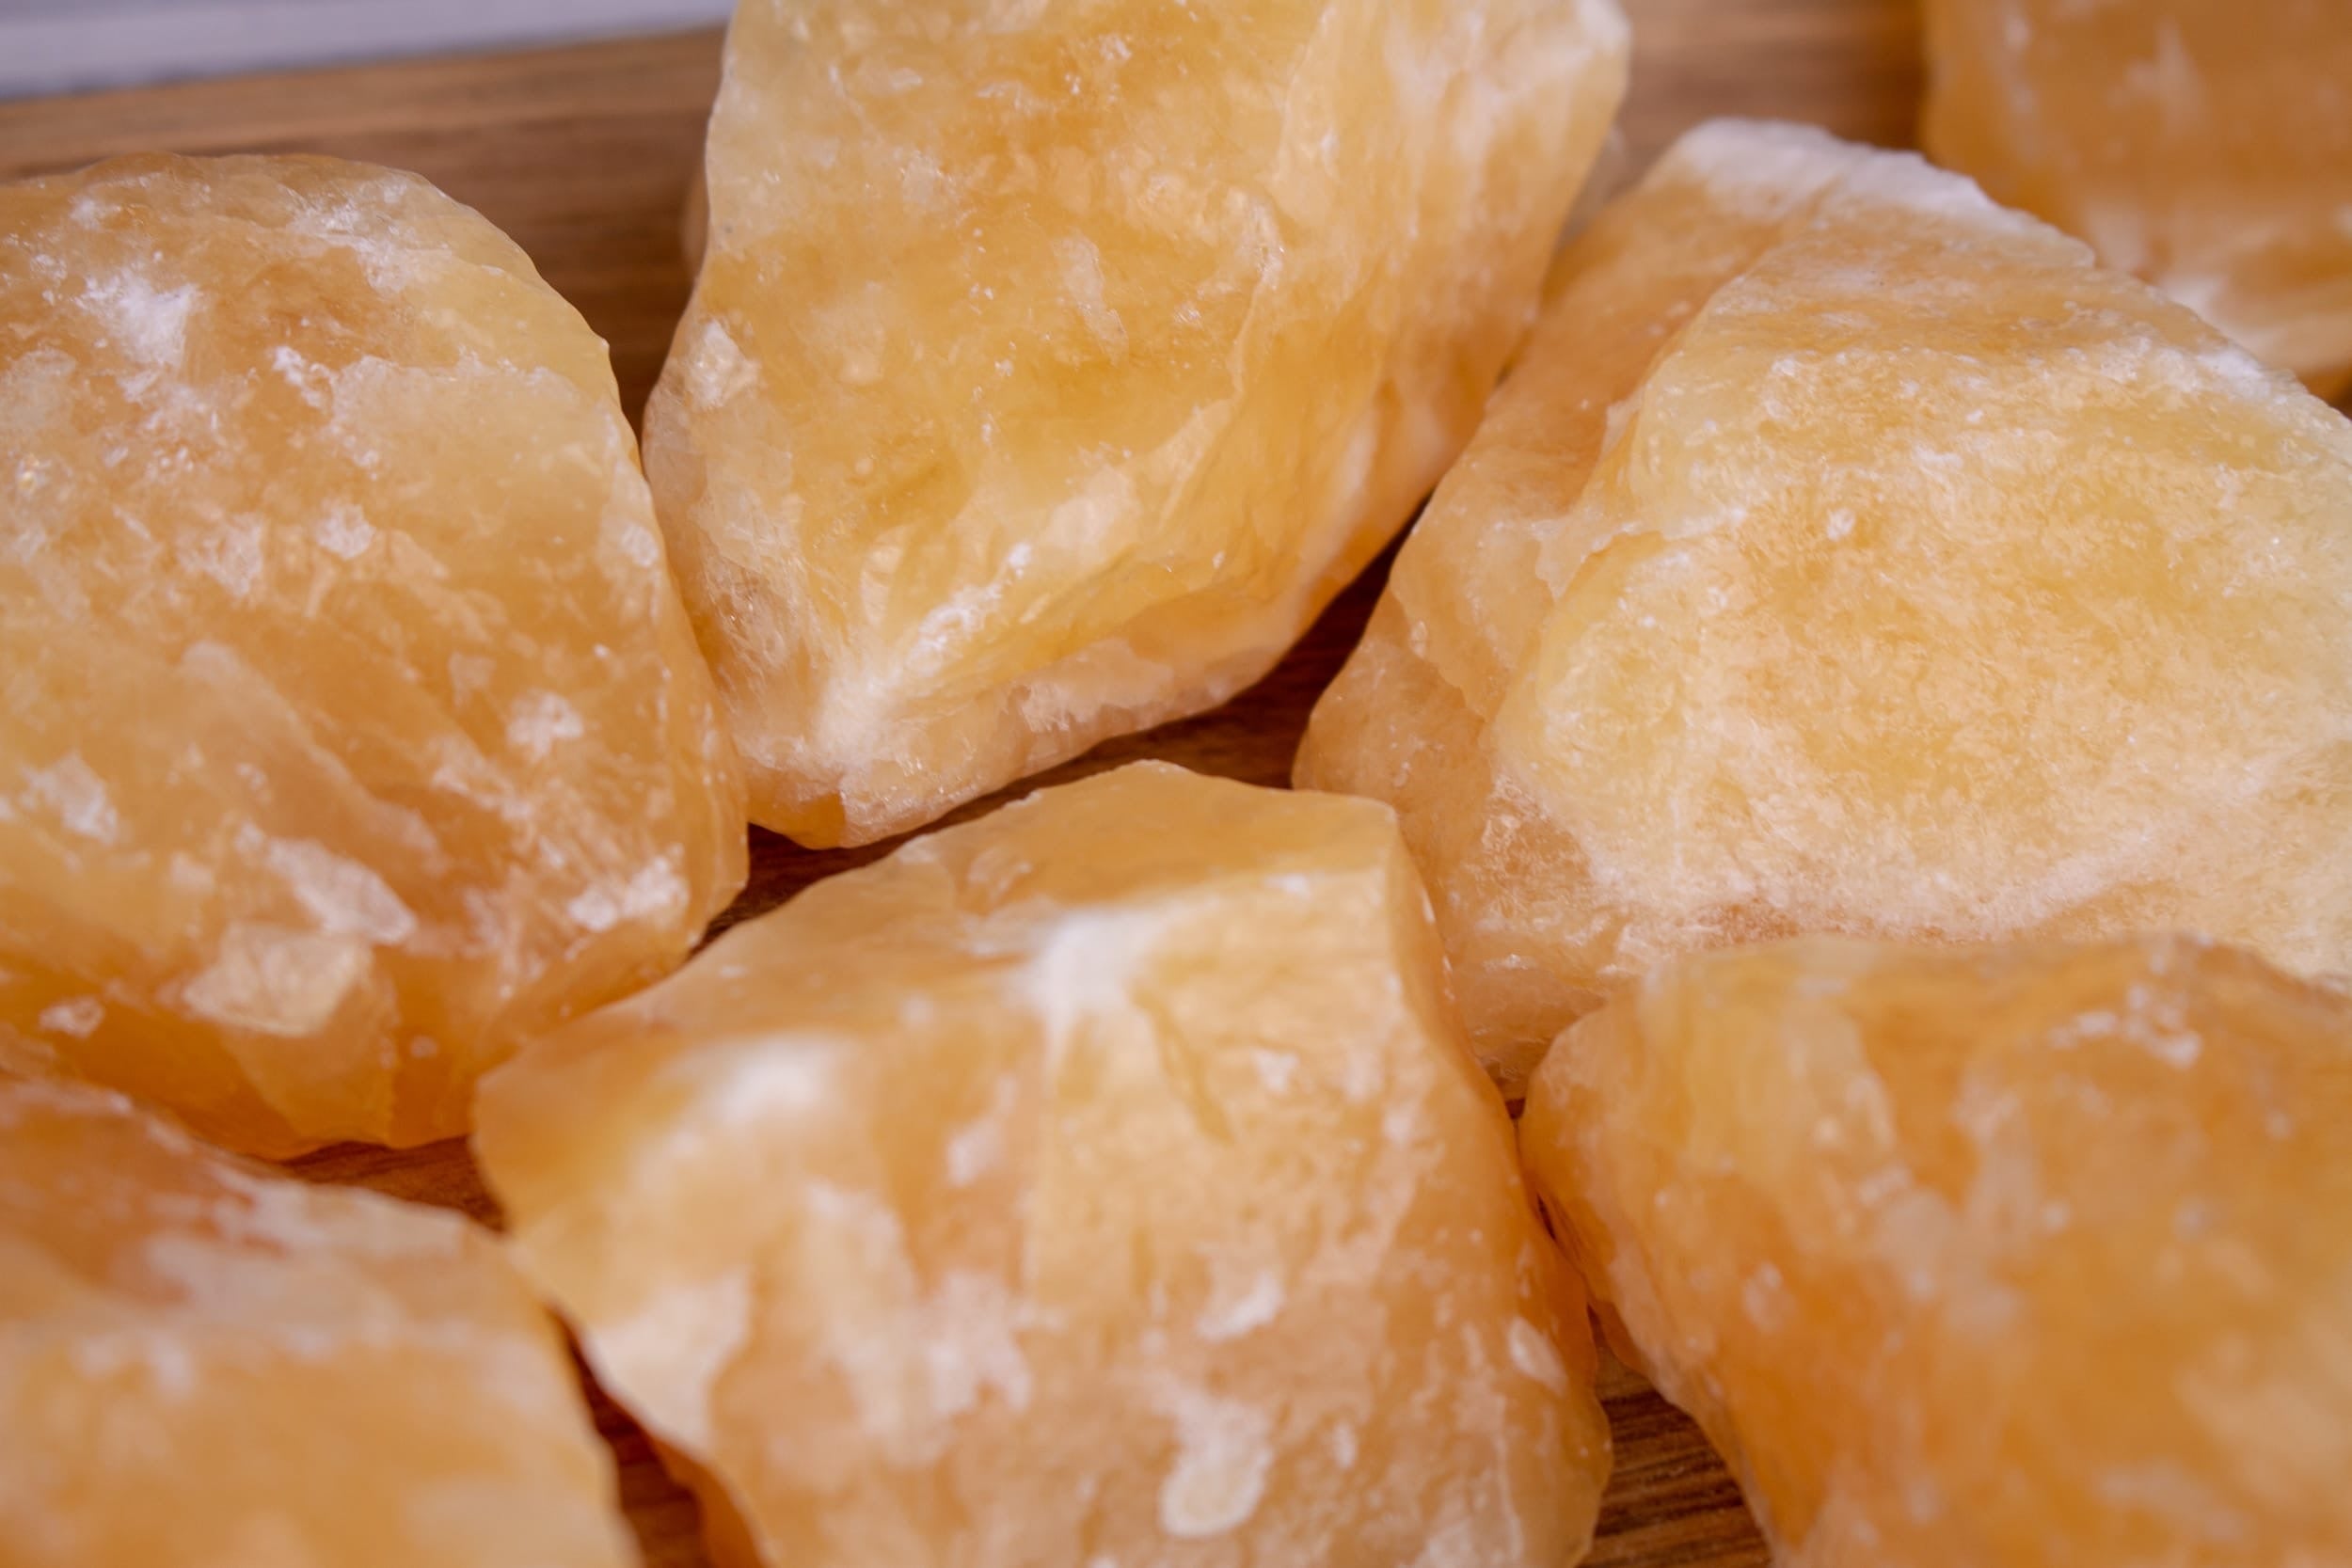 Mexican Orange Calcite Rough Natural Crystal Mineral Stones 3 pieces